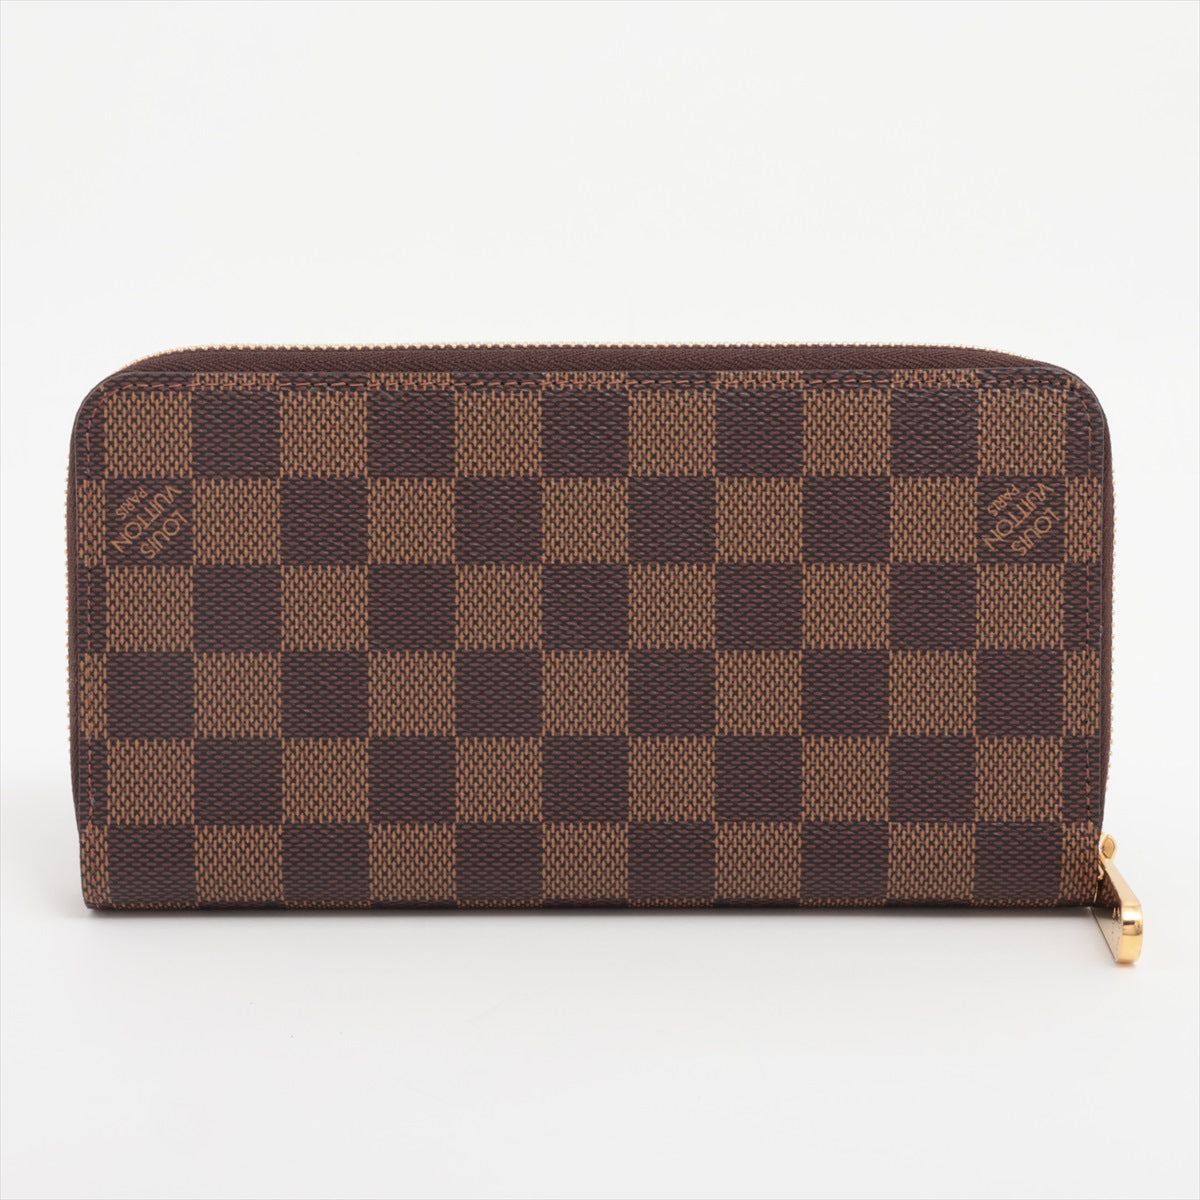 Louis Vuitton Damier Zippy Wallet N41661 Zip Round Wallet There was an RFID response